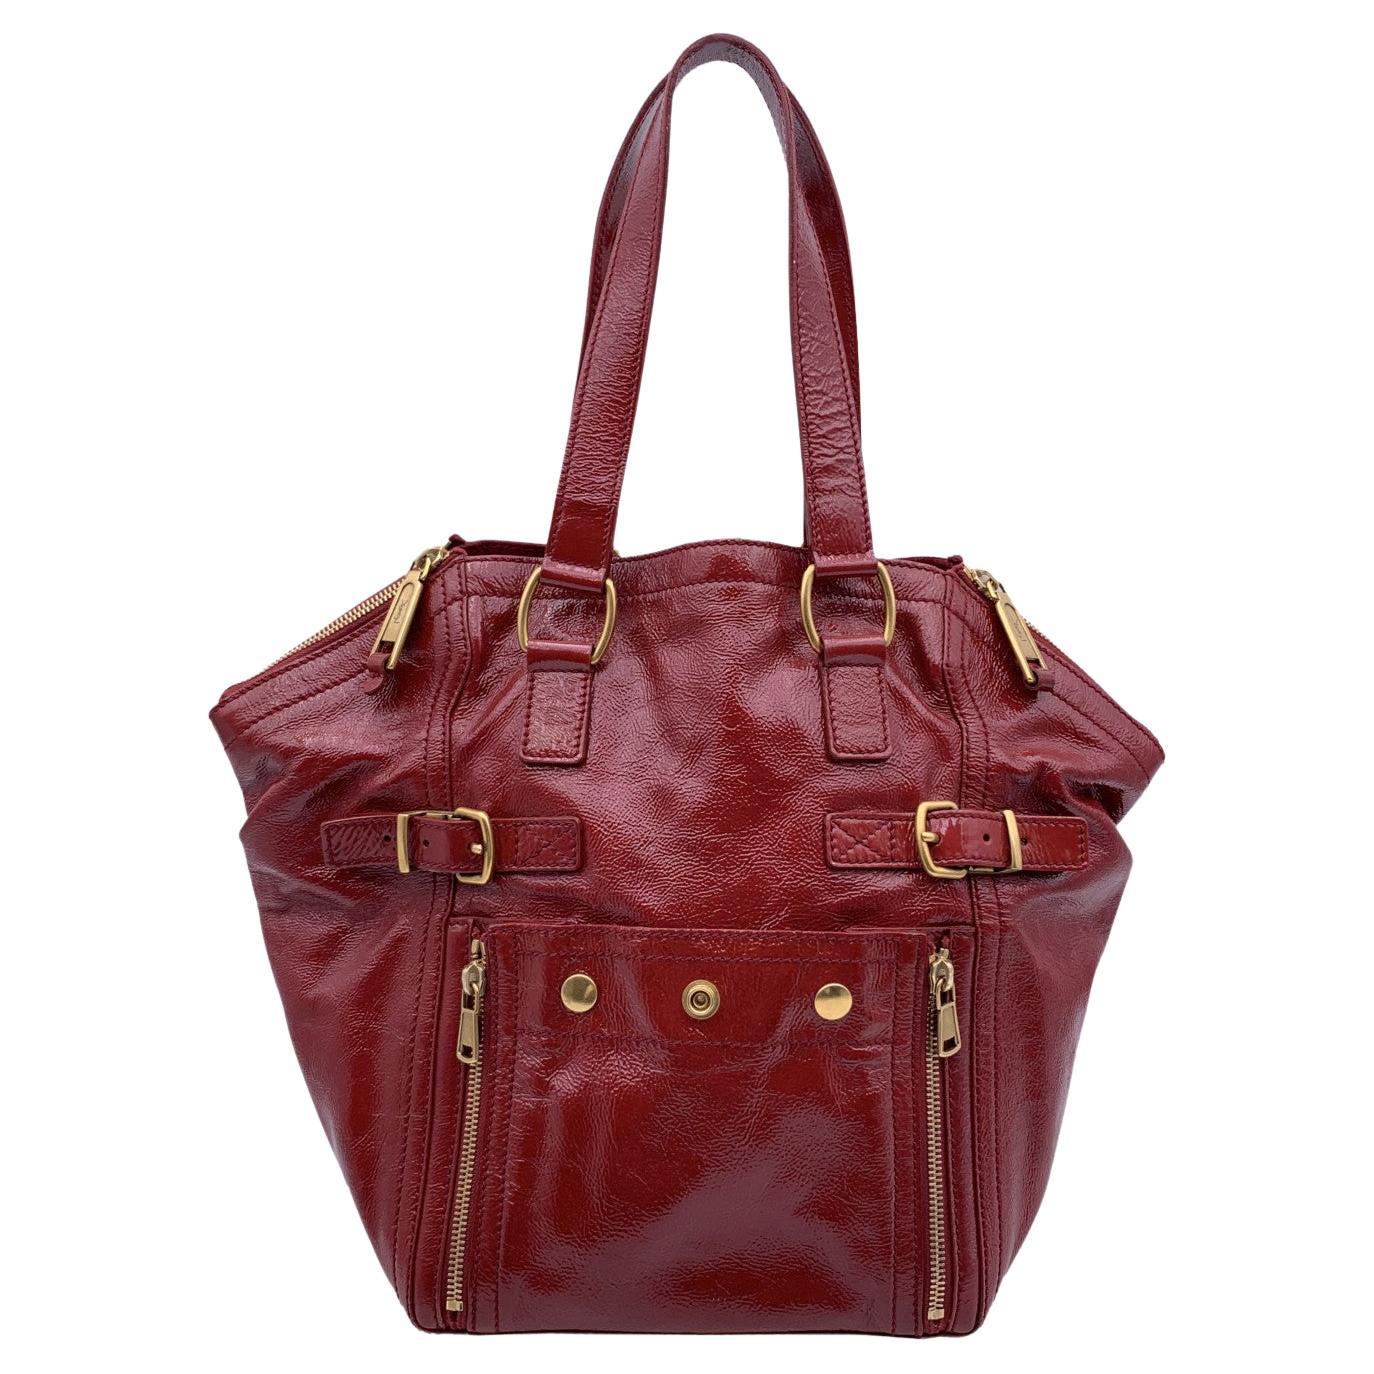 Yves Saint Laurent Red Patent Leather Downtown Tote Shoulder Bag